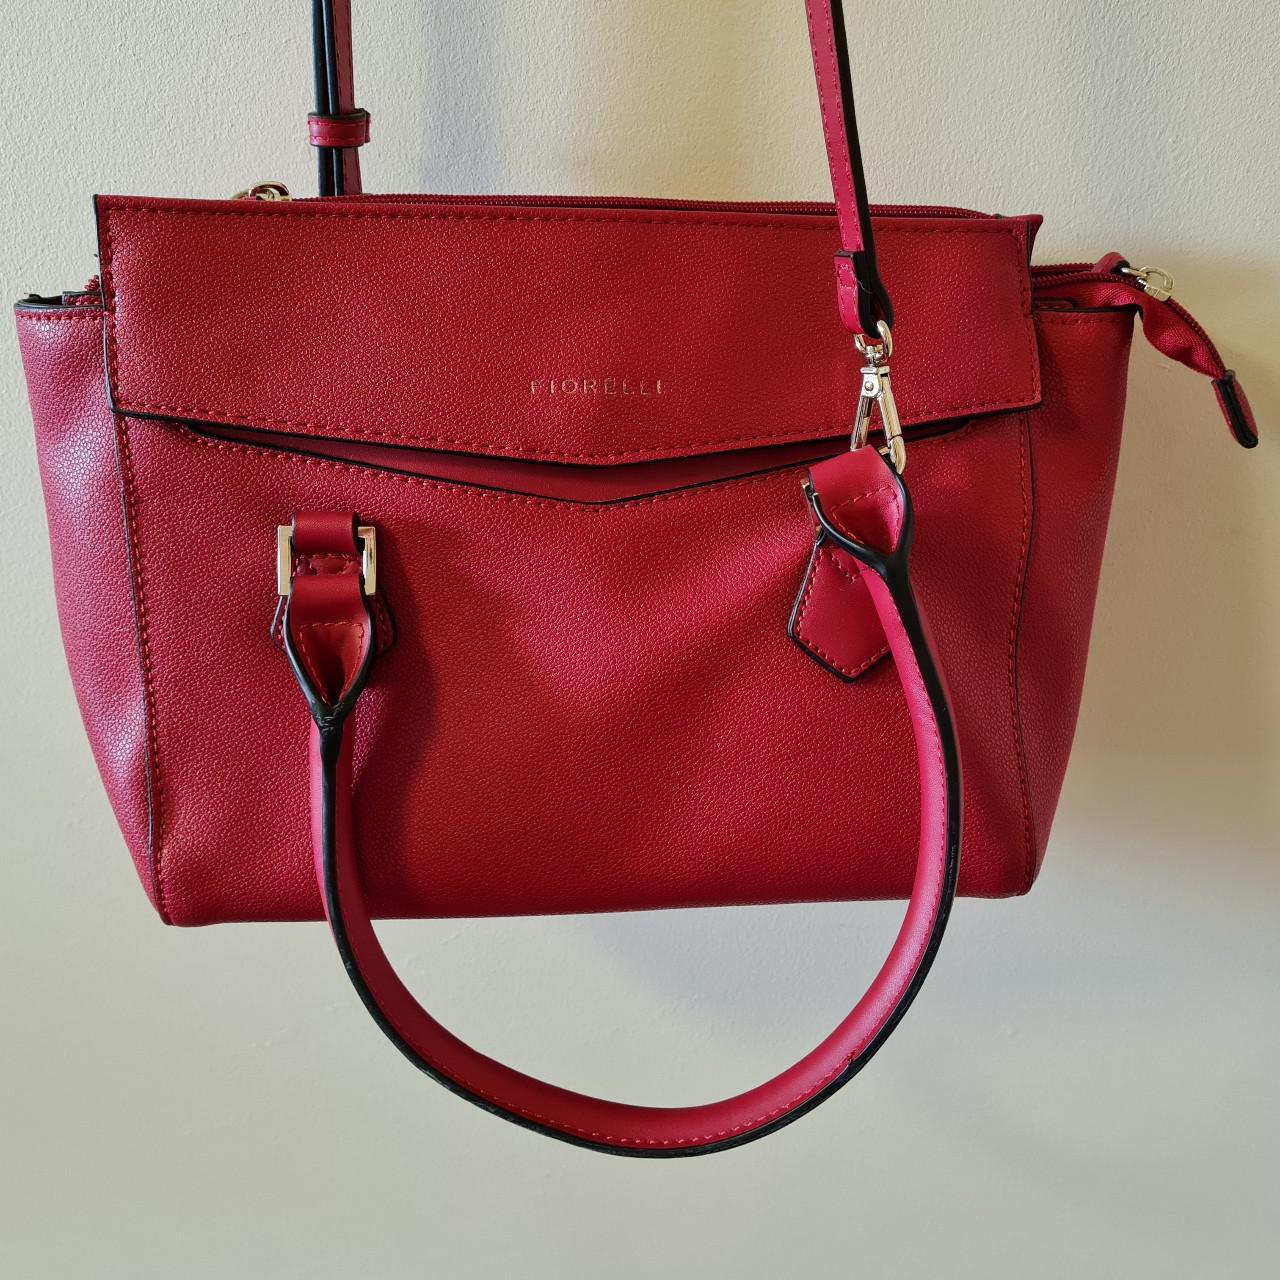 Product Image 2 - Red Fiorelli Bag with Shoulder